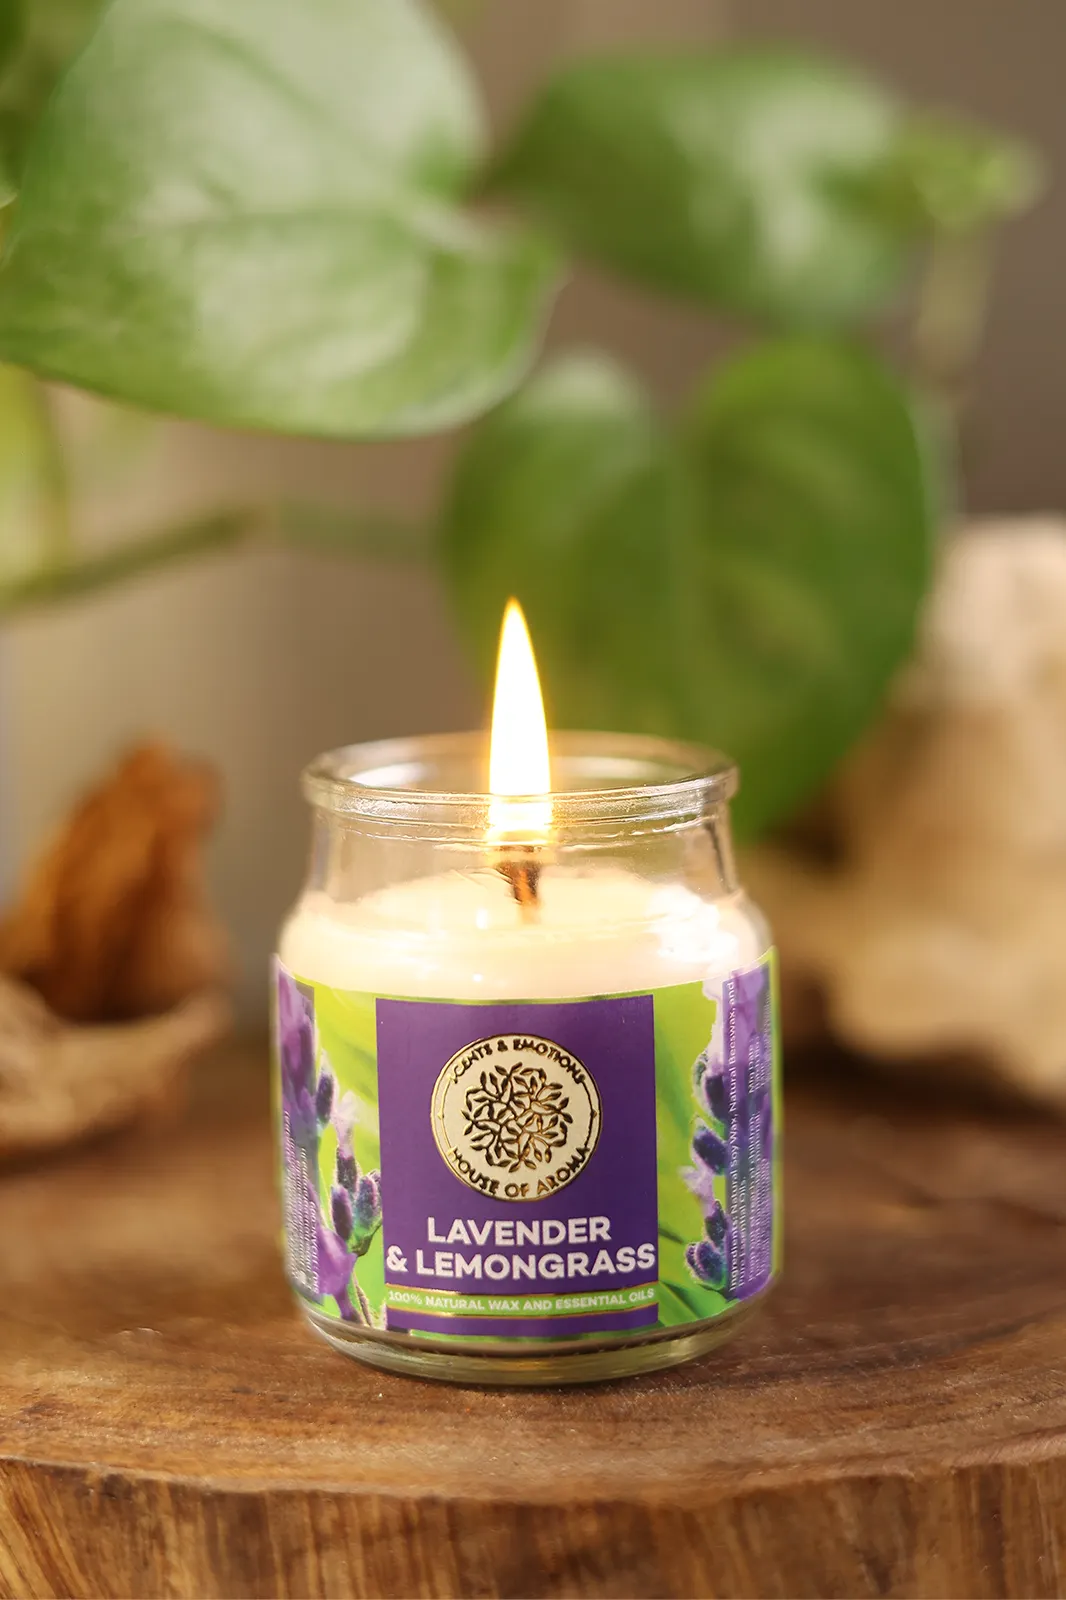 Lavender & Lemongrass Natural Scented Candle, lavender natural scented candle, lavender candles aromatherapy, lemongrass essential oil candle, House of Aroma